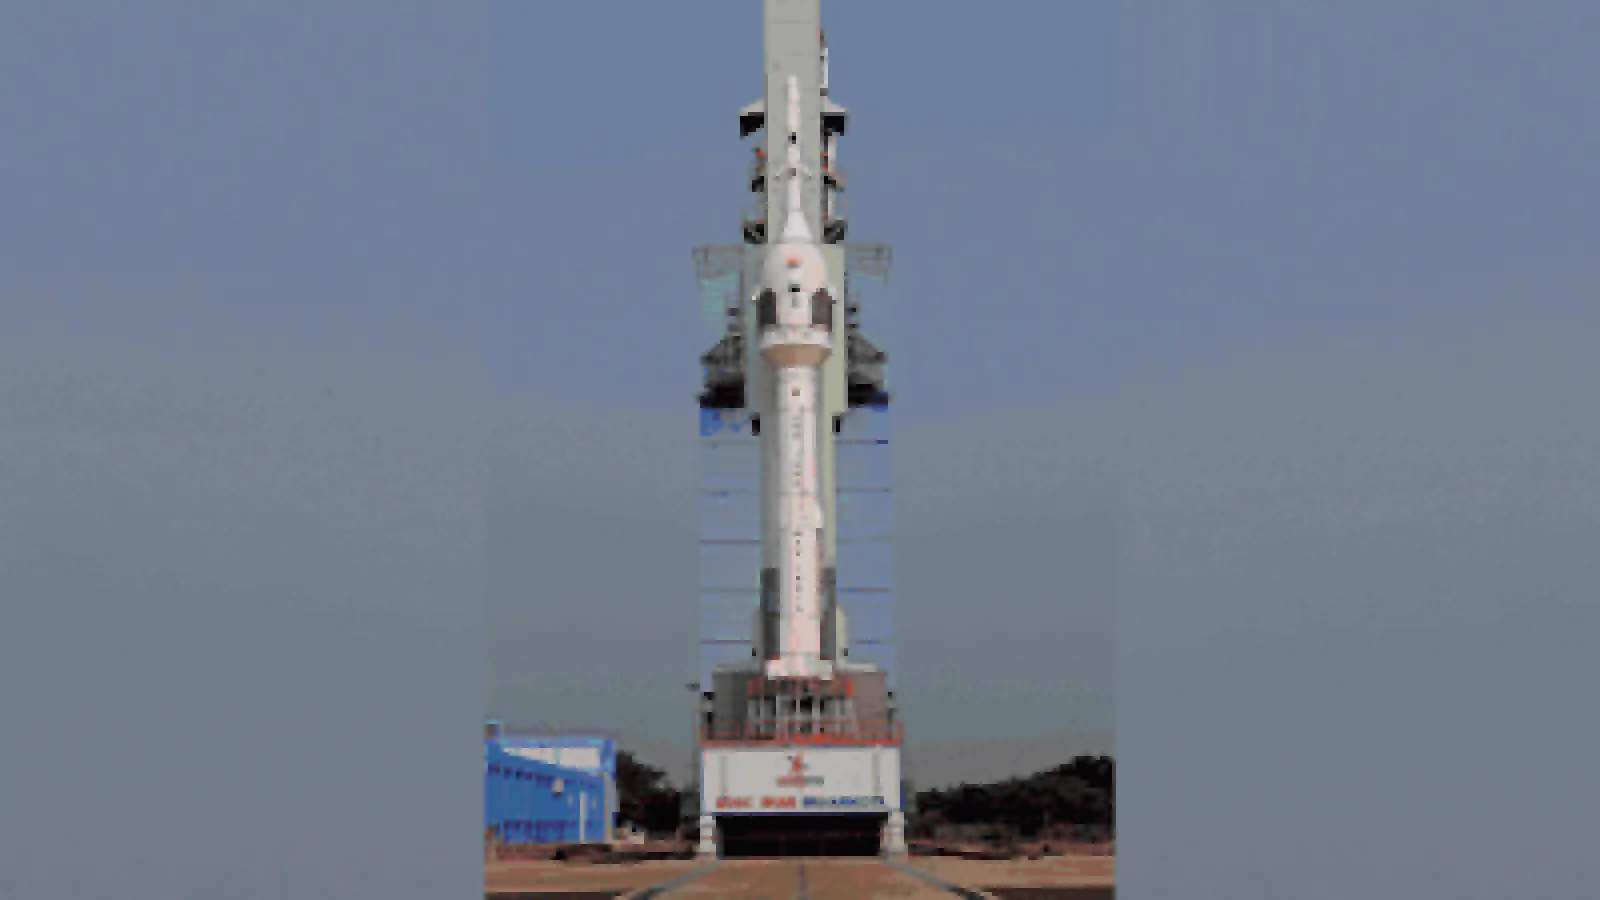 ISRO News: All test flights for the Gaganyaan mission will be done this year, which is scheduled to launch in 2025